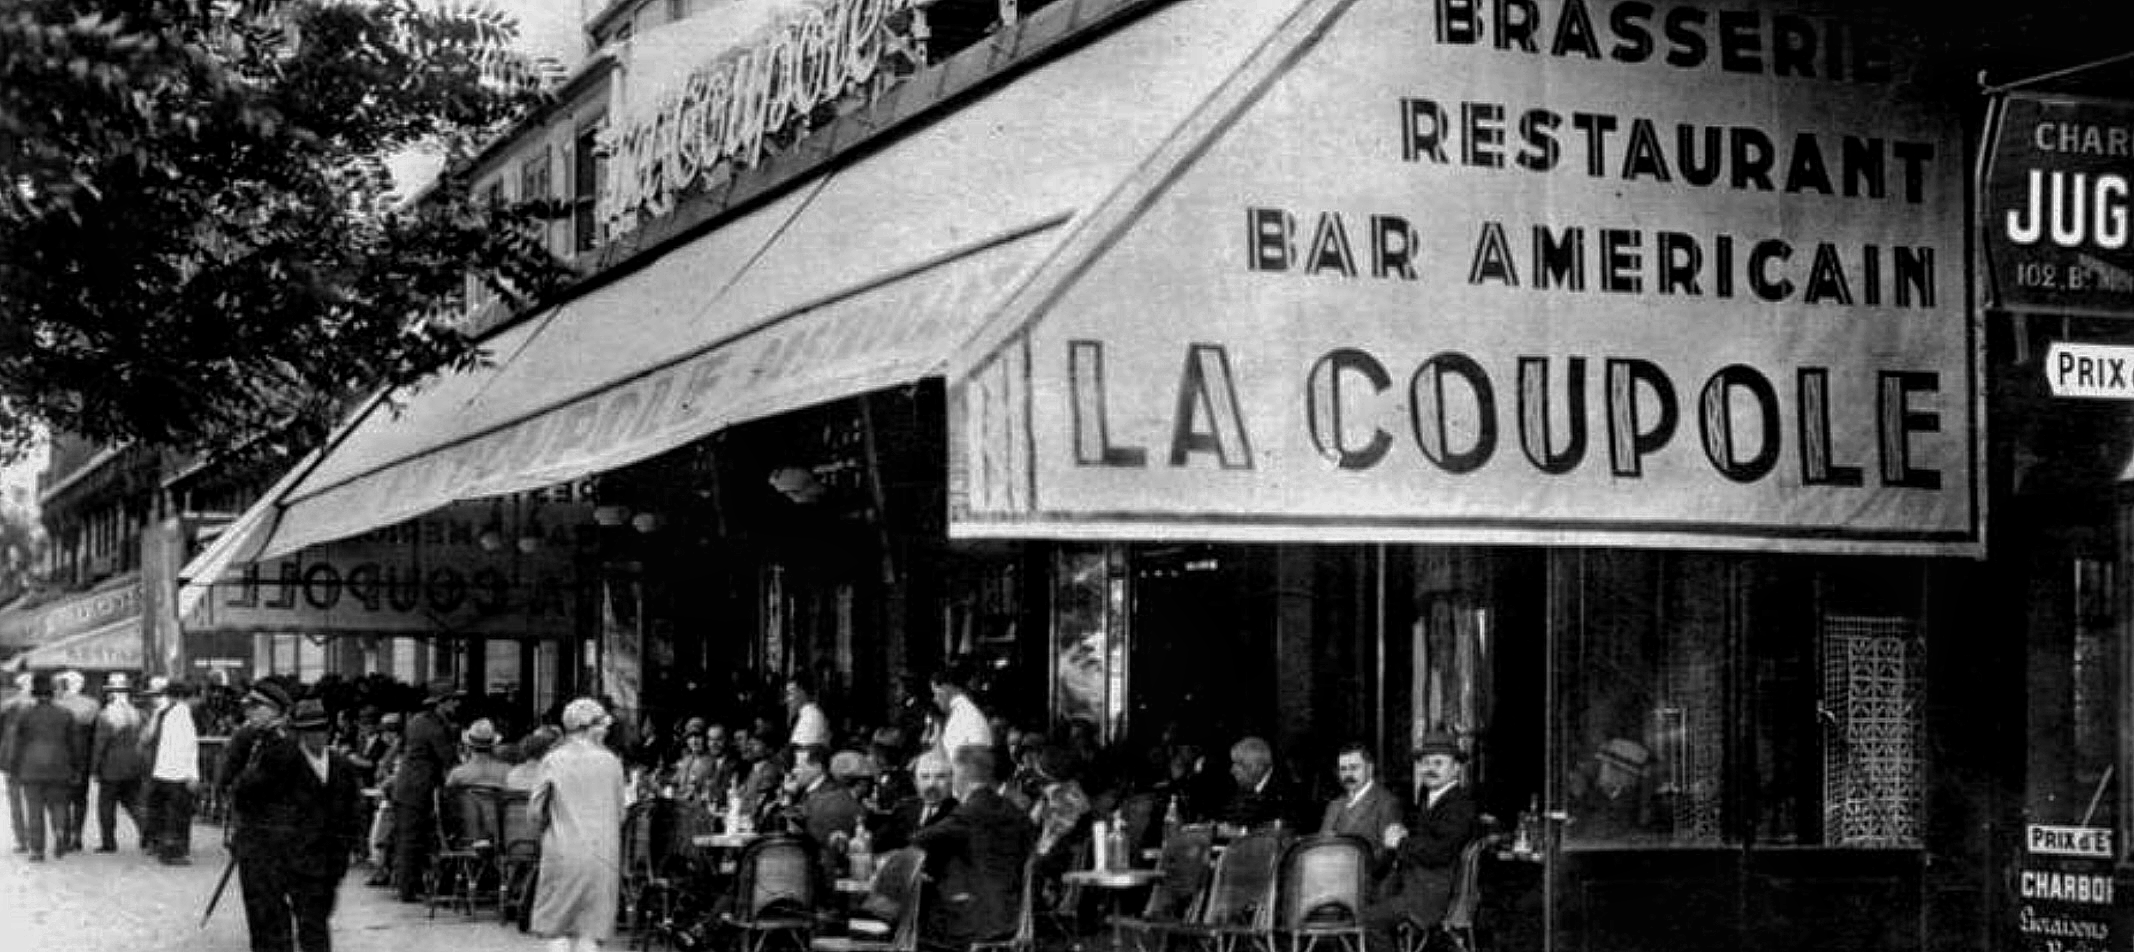 La Coupole, Montparnasse, Paris, between the two wars. It was in the cafés of Montparnasse – which replaced Montmartre from the beginning of the century – that the world history of art was written in those years. What triumphed there, to an ever greater extent than spirit, was culture. A culture created by an extreme artistic cauldron fuelled in equal parts by meetings and interactions  between artists, gallery owners, collectors and various institutions.